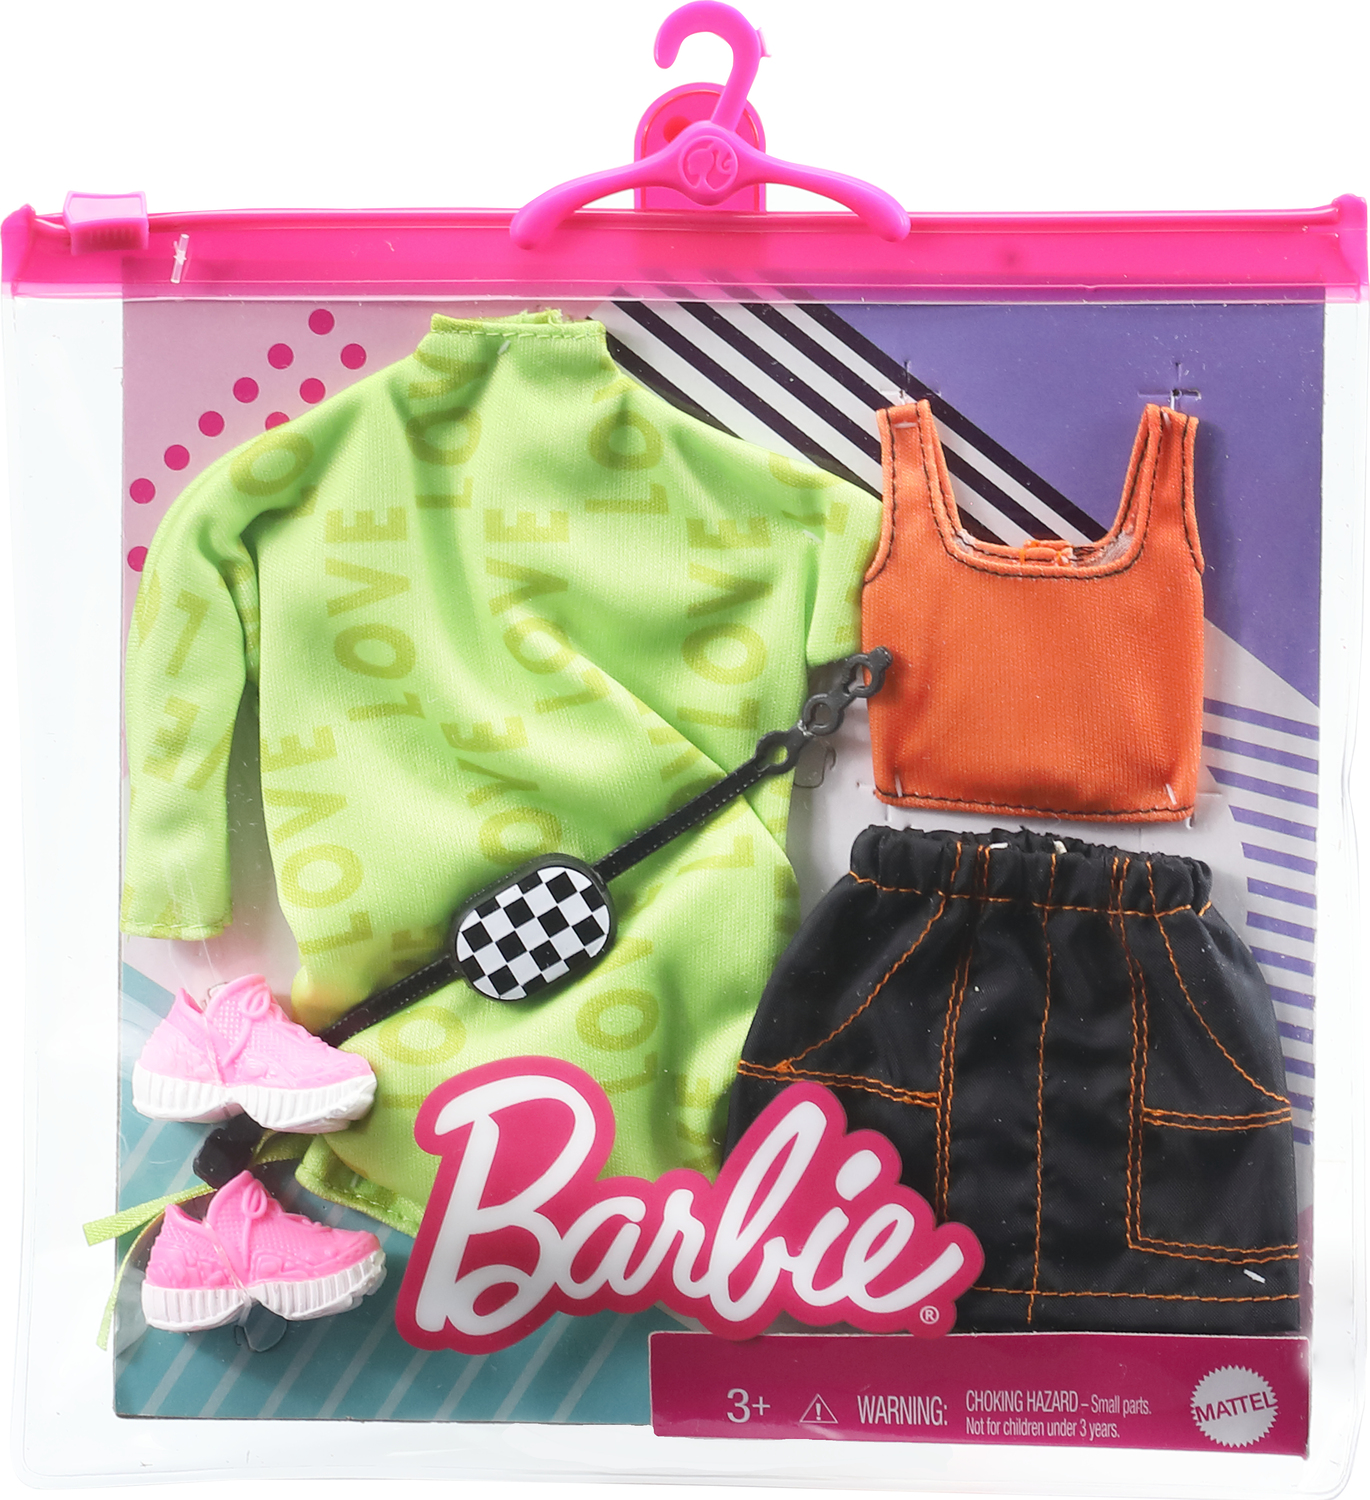 Fashion Mix 'n' Match Barbie Doll Set with Clothing Accessories